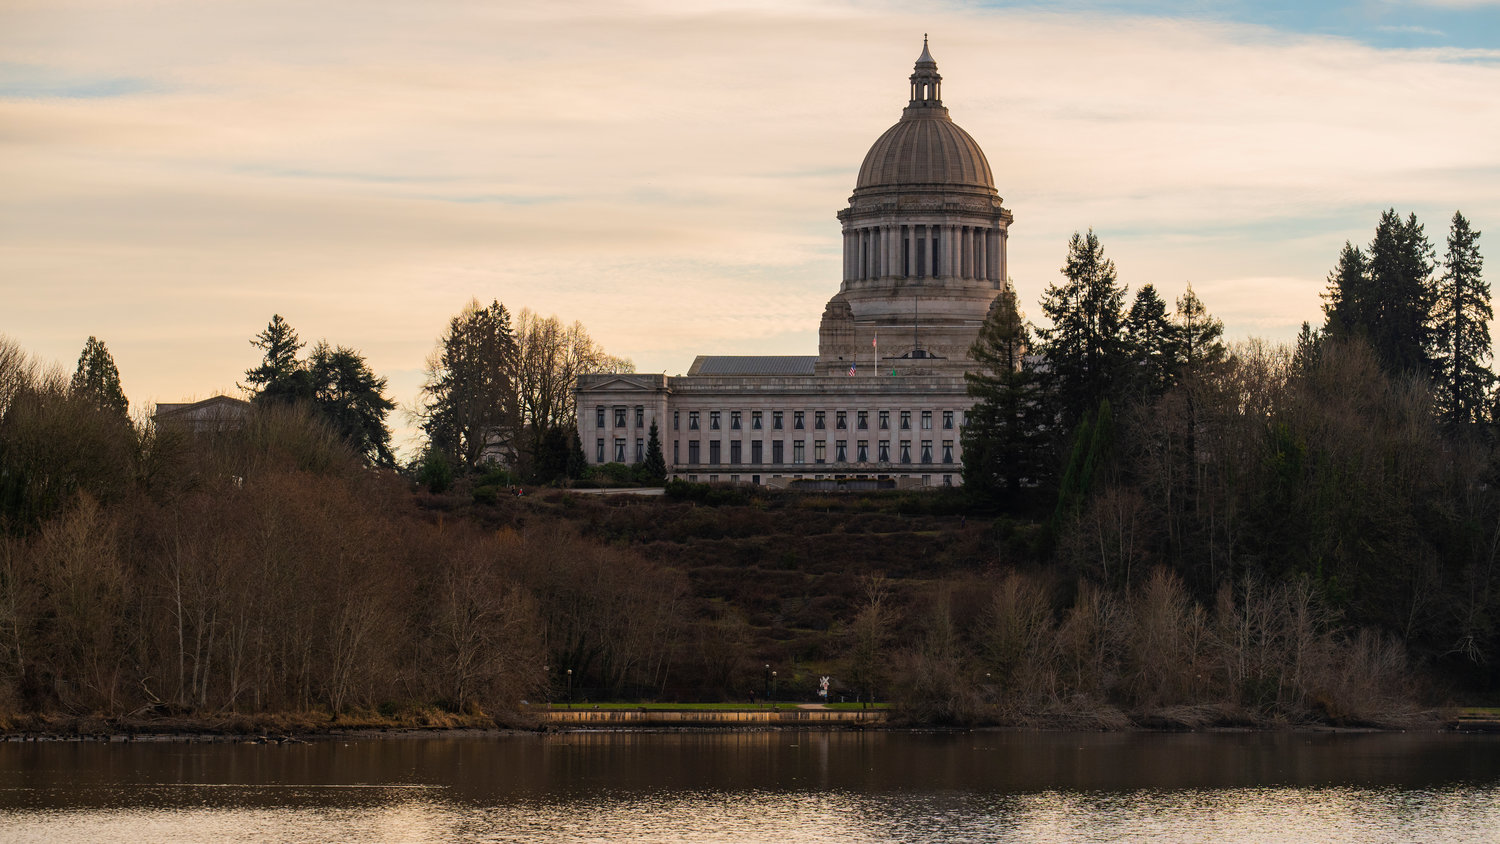 The Washington State Capitol Building in Olympia is pictured in this file photo.